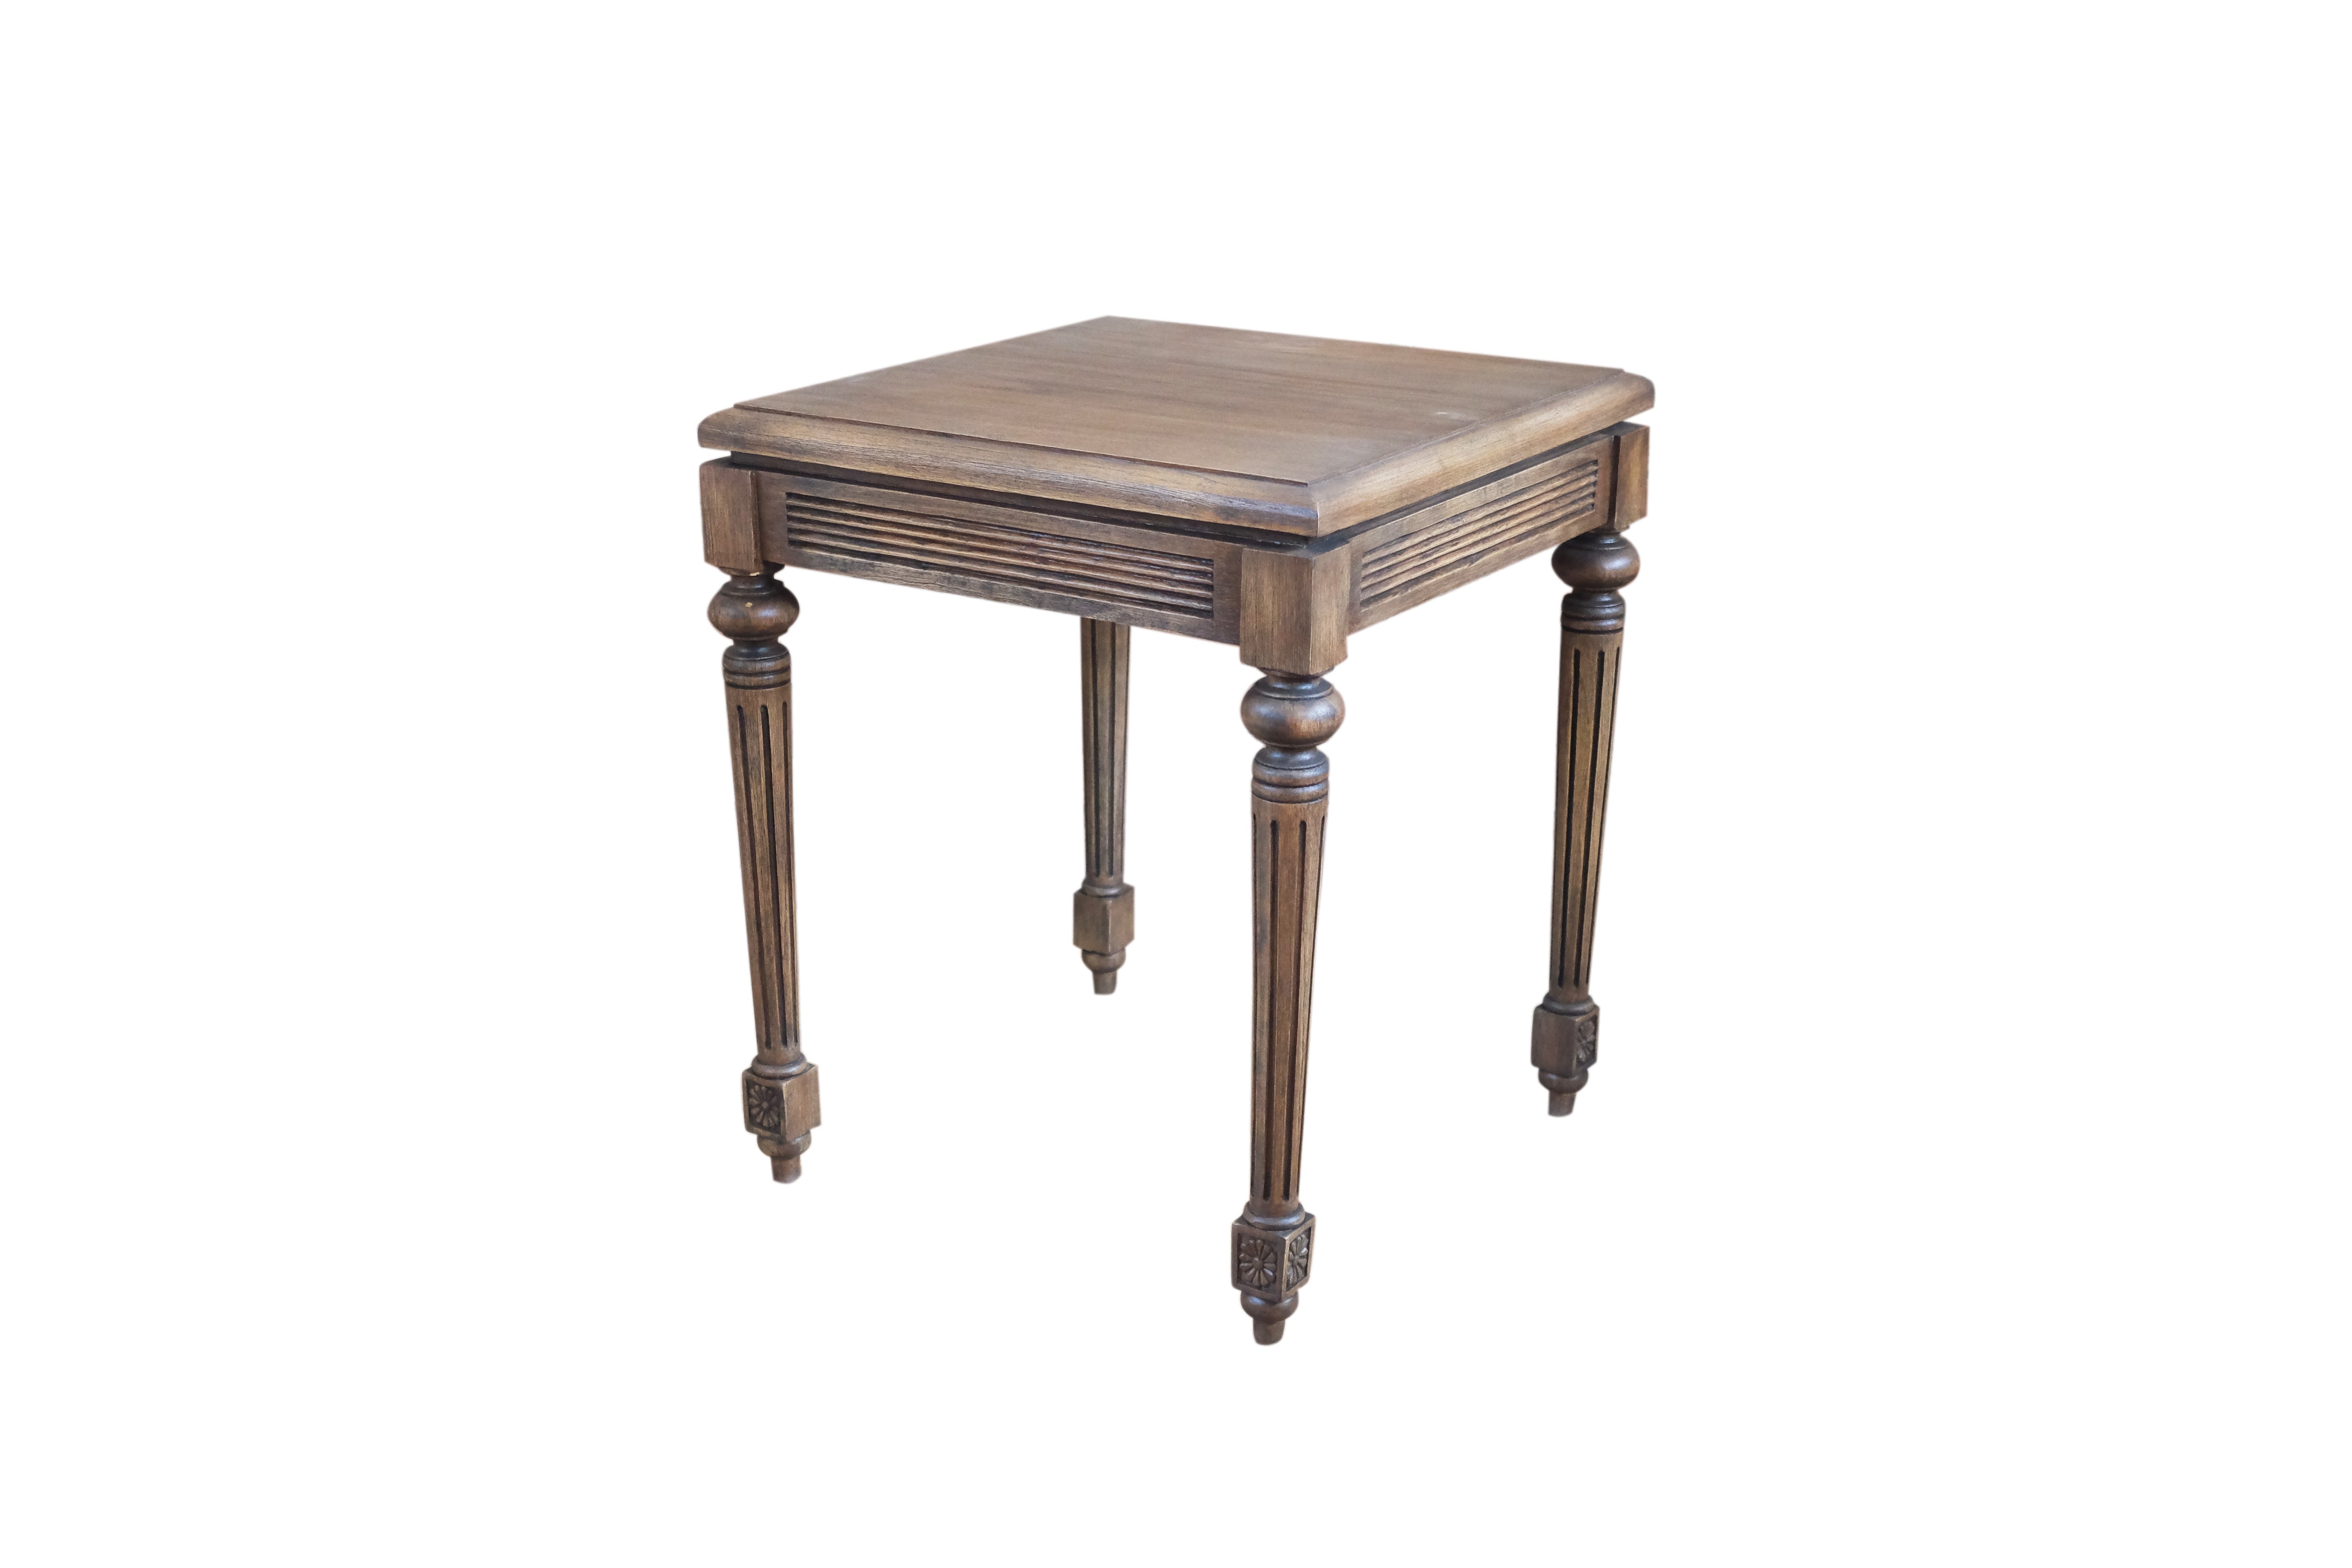 Everly Side Table